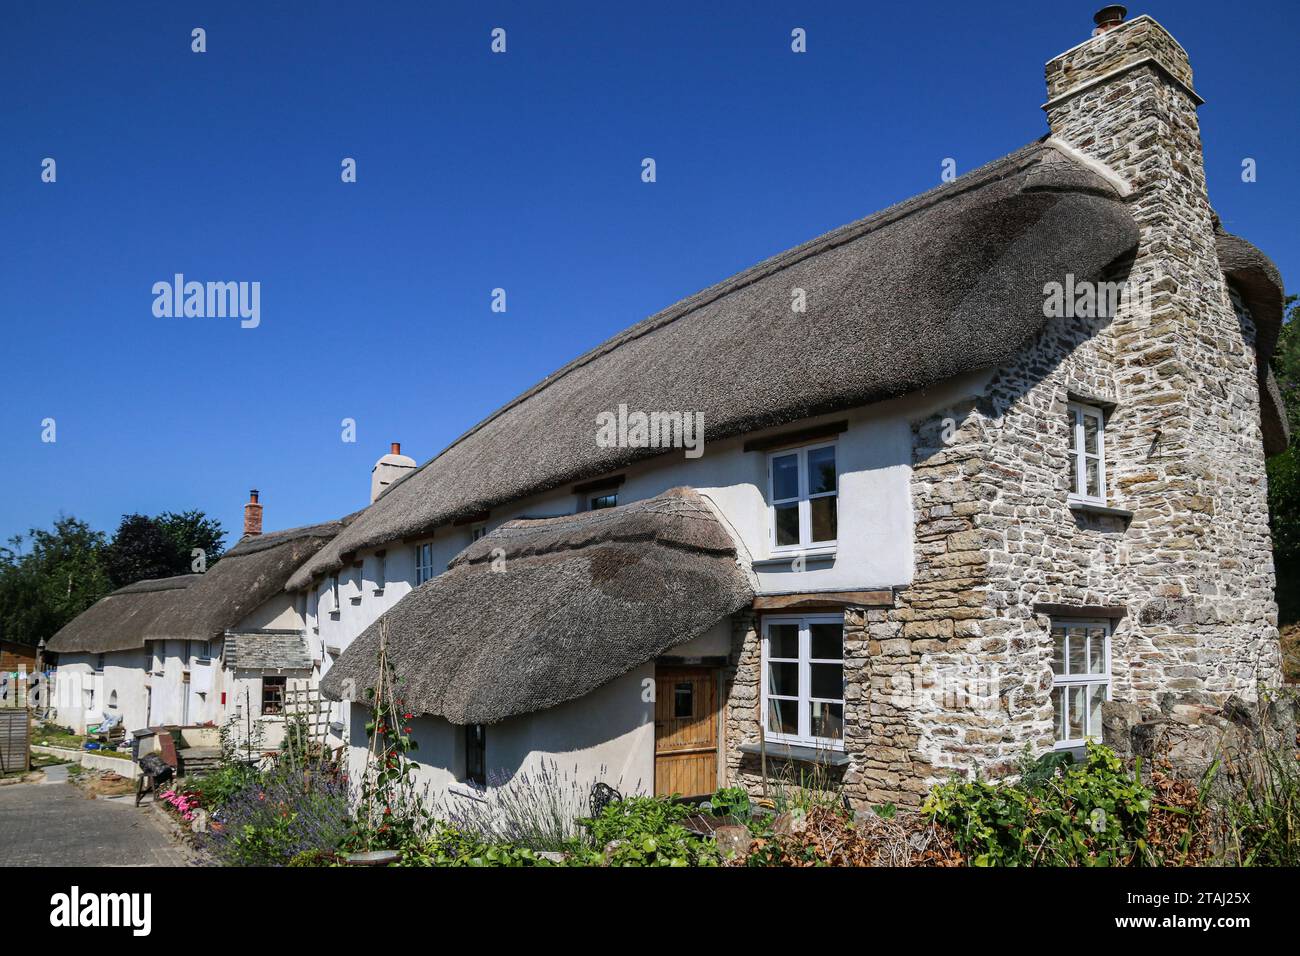 Typical thatched cottages in Croyde village, Devon, England Stock Photo